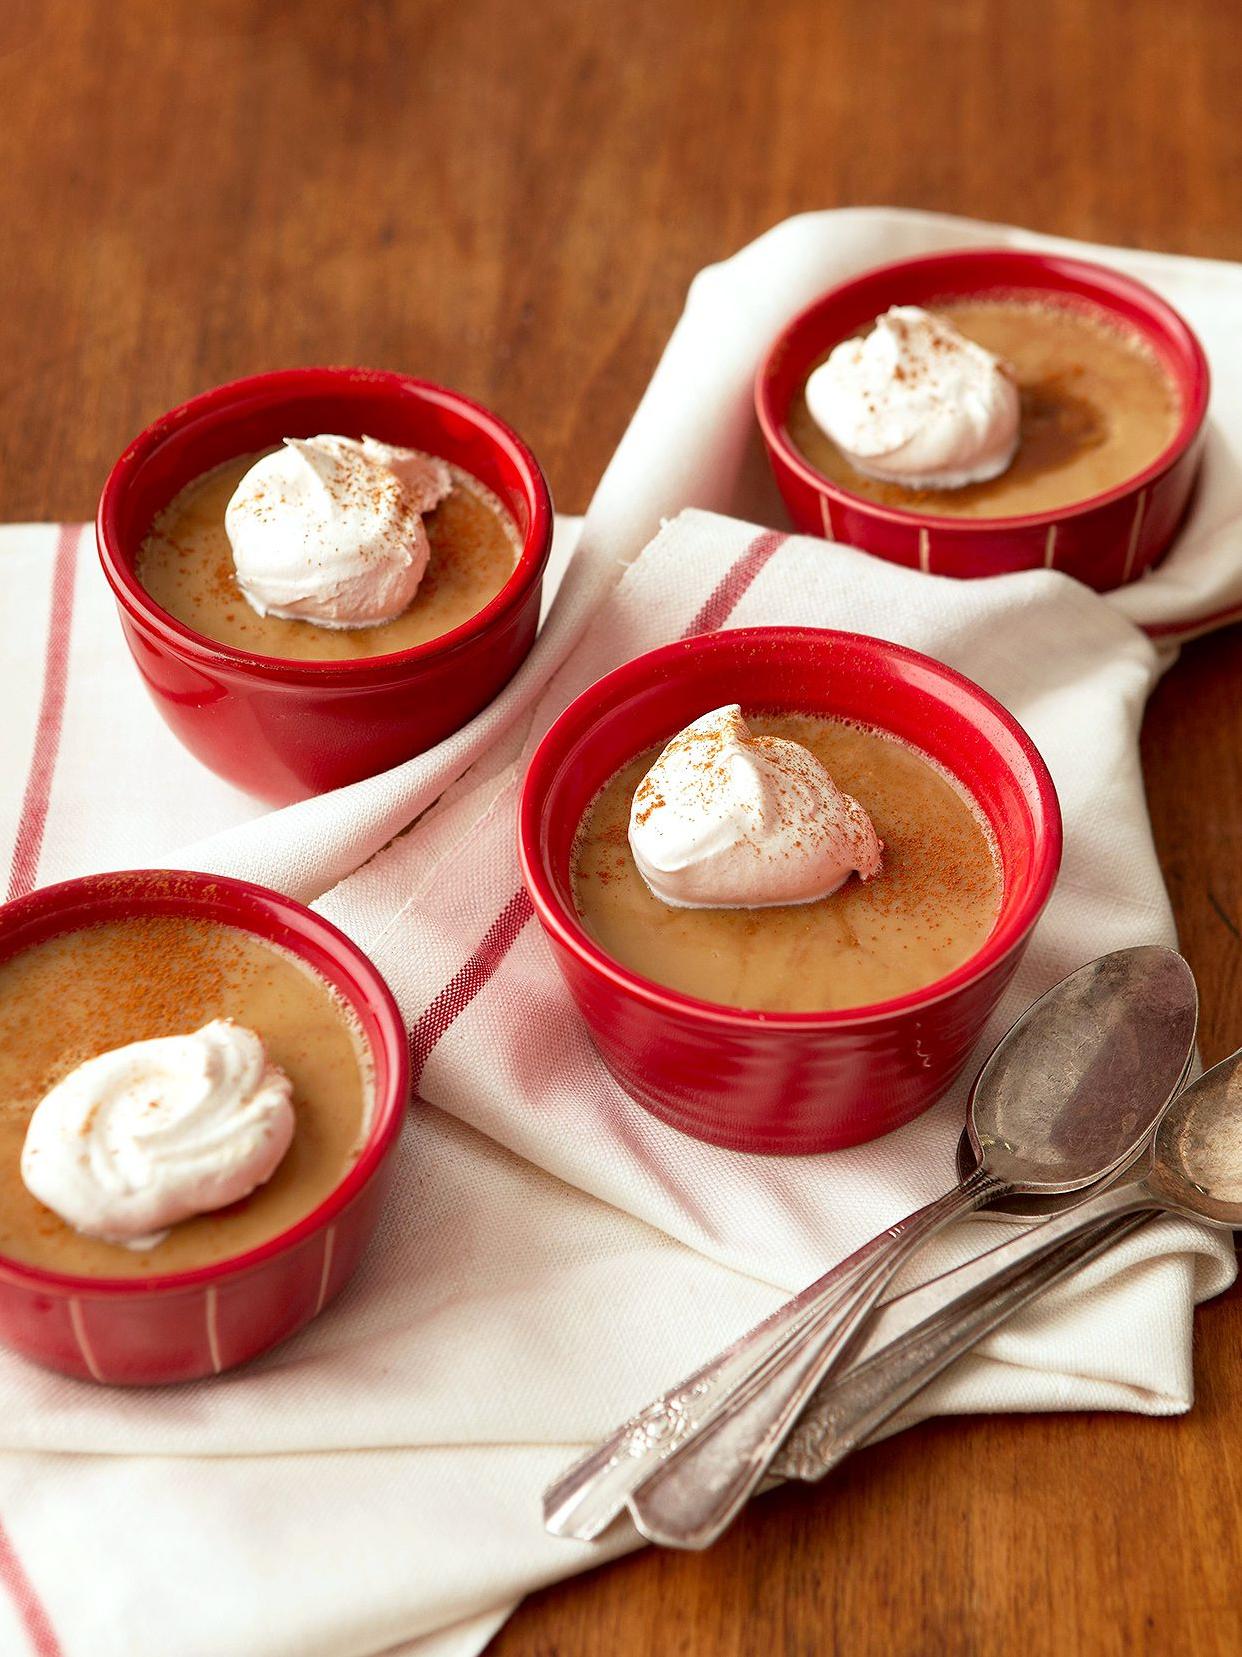  Picture yourself savoring every spoonful of this indulgent Coffee and Orange Custard.